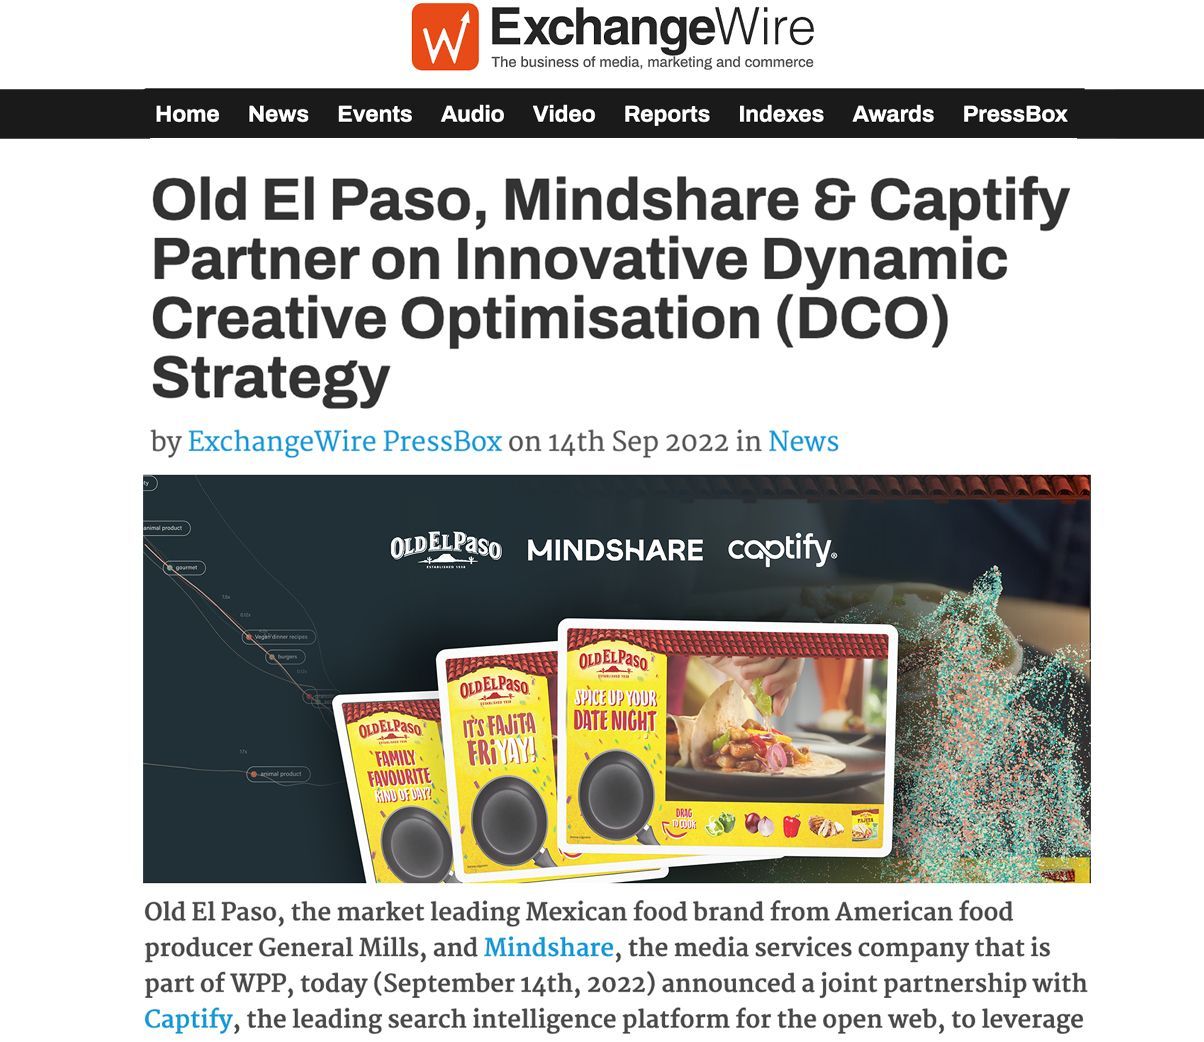 ExchangeWire: Old El Paso, Mindshare and Captify Partner On Innovative Dynamic Creative Optimisation (DCO) Strategy Powered By Search Intelligence